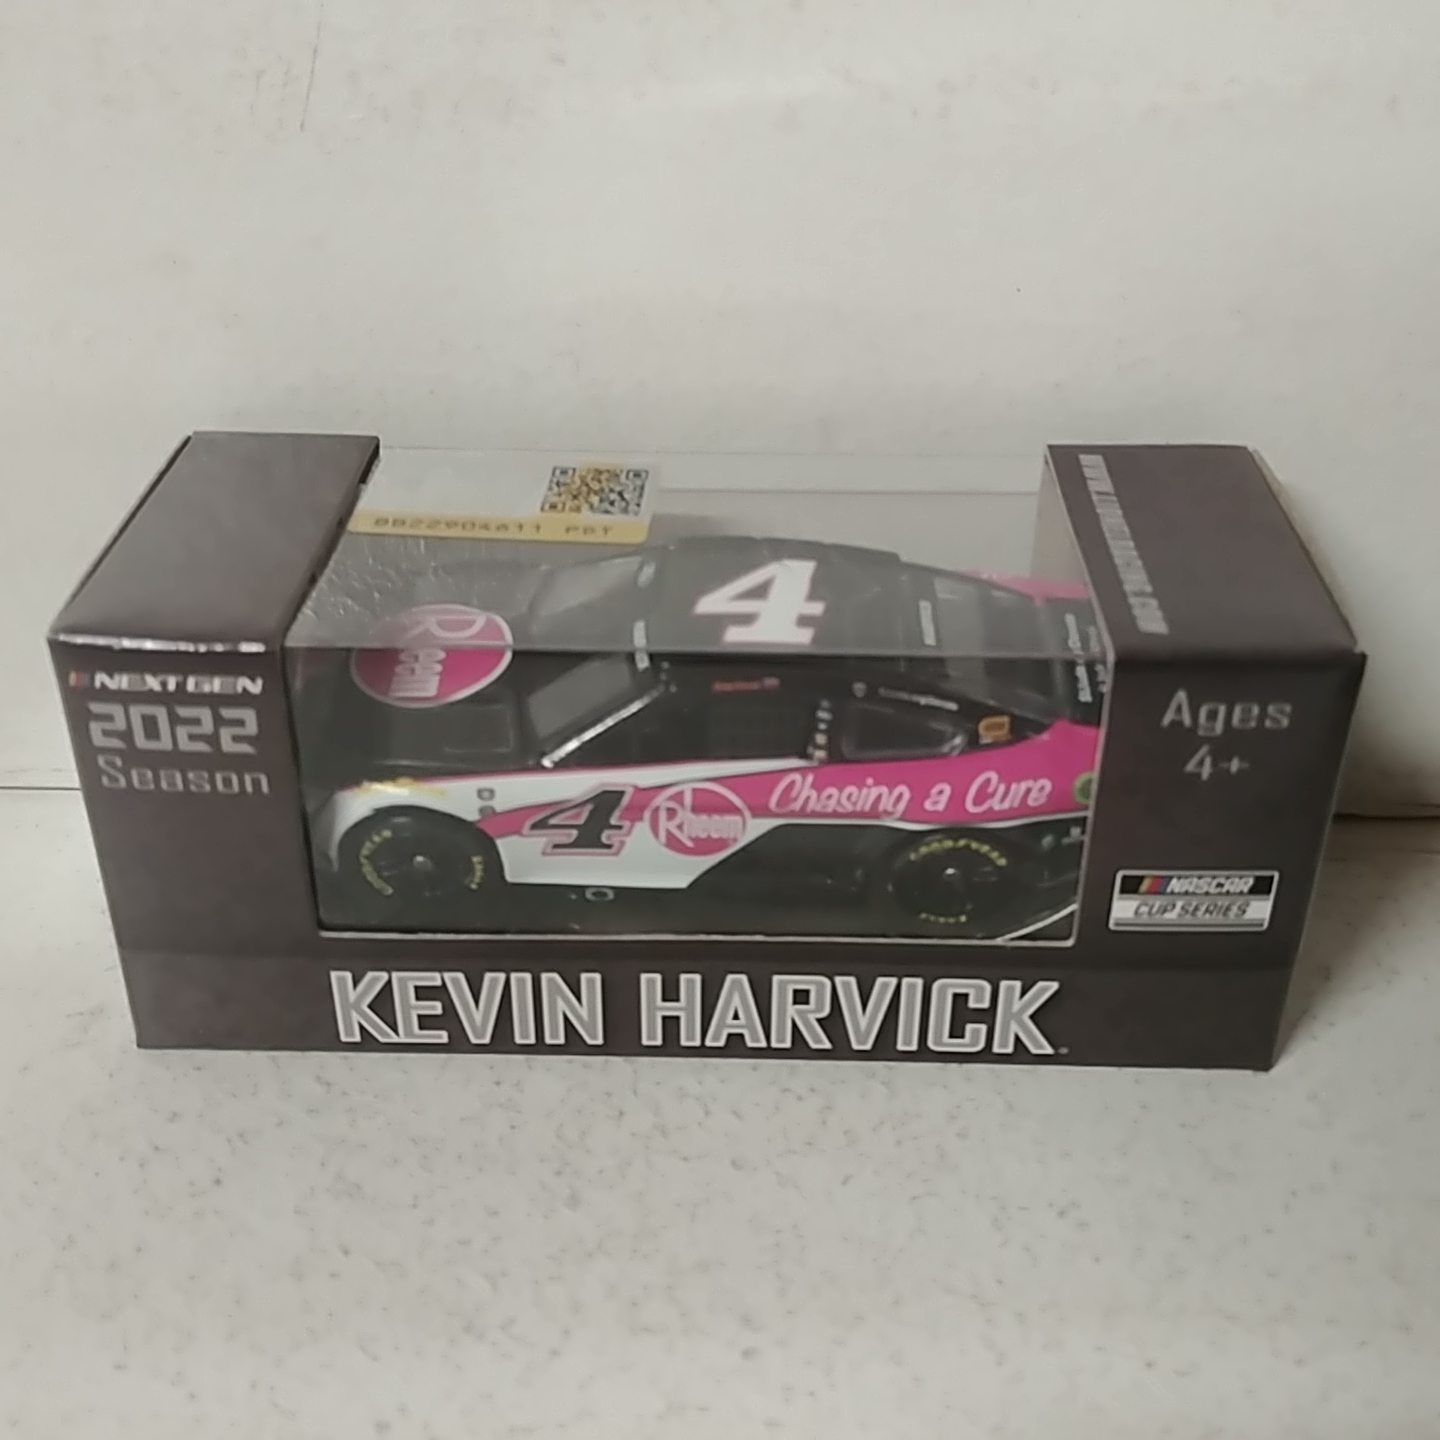 2022 Kevin Harvick 1/64th Rheem 500th Race "Chasing A Cure""Next Gen" Mustang